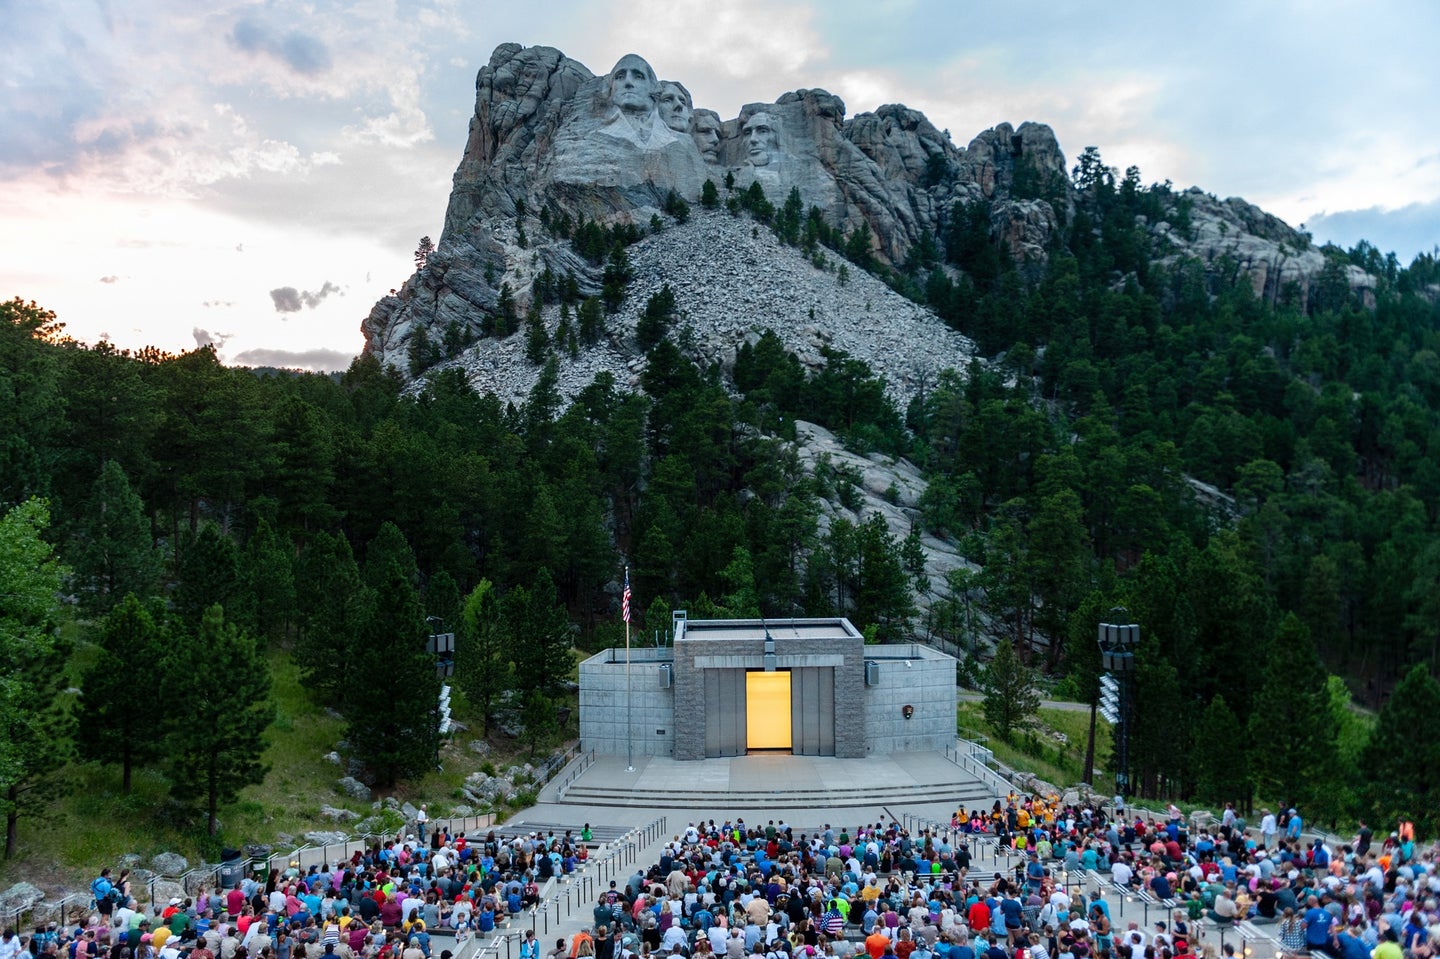 Mount Rushmore National Memorial in South Dakota at dusk with a crowd of visitors